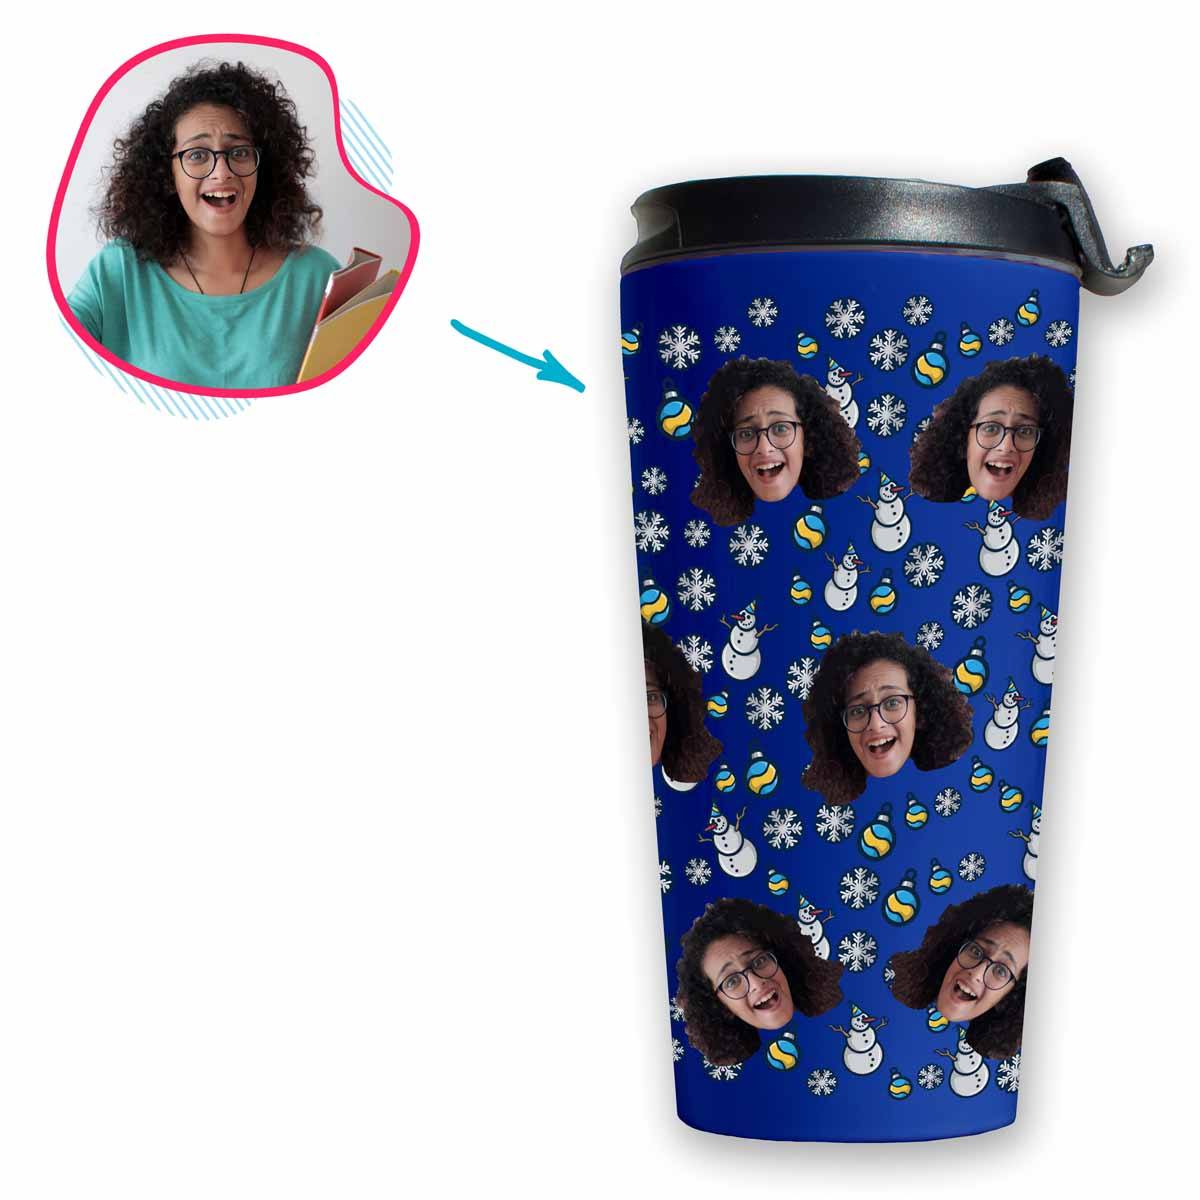 darkblue Snowman travel mug personalized with photo of face printed on it